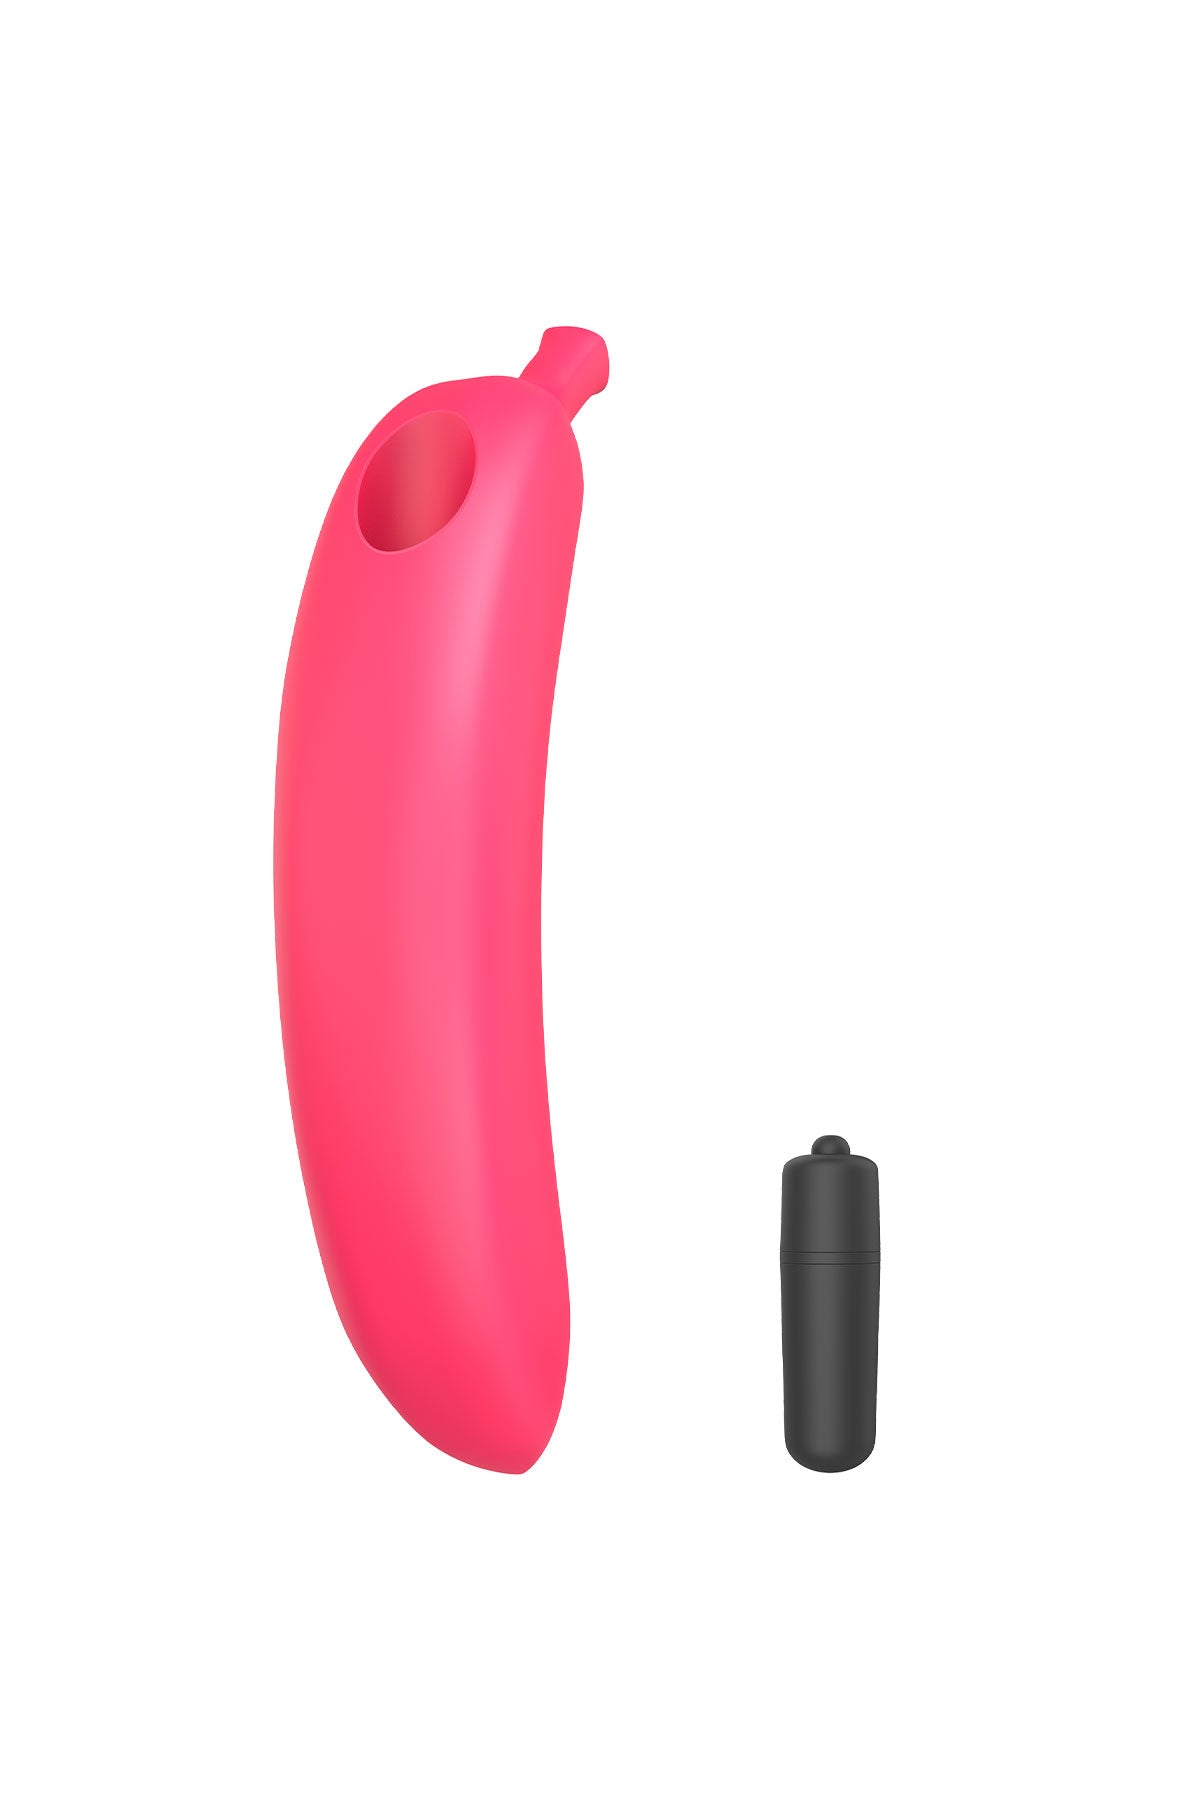 Oh Yes Banana Vibrator by Love To Love |